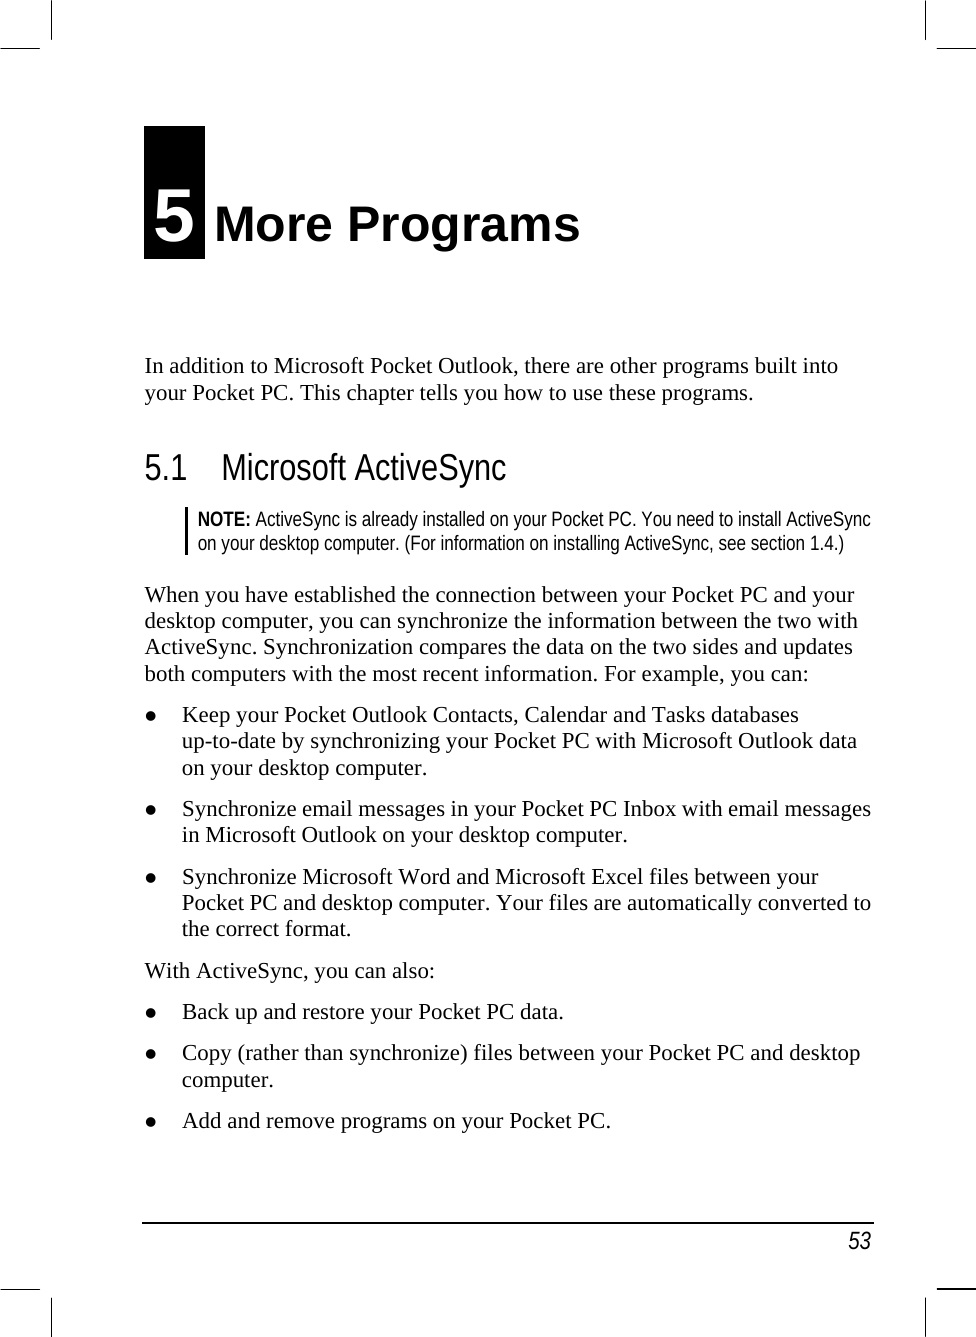   53 5 More Programs In addition to Microsoft Pocket Outlook, there are other programs built into your Pocket PC. This chapter tells you how to use these programs. 5.1 Microsoft ActiveSync NOTE: ActiveSync is already installed on your Pocket PC. You need to install ActiveSync on your desktop computer. (For information on installing ActiveSync, see section 1.4.)  When you have established the connection between your Pocket PC and your desktop computer, you can synchronize the information between the two with ActiveSync. Synchronization compares the data on the two sides and updates both computers with the most recent information. For example, you can:   Keep your Pocket Outlook Contacts, Calendar and Tasks databases up-to-date by synchronizing your Pocket PC with Microsoft Outlook data on your desktop computer.   Synchronize email messages in your Pocket PC Inbox with email messages in Microsoft Outlook on your desktop computer.   Synchronize Microsoft Word and Microsoft Excel files between your Pocket PC and desktop computer. Your files are automatically converted to the correct format. With ActiveSync, you can also:   Back up and restore your Pocket PC data.   Copy (rather than synchronize) files between your Pocket PC and desktop computer.   Add and remove programs on your Pocket PC. 